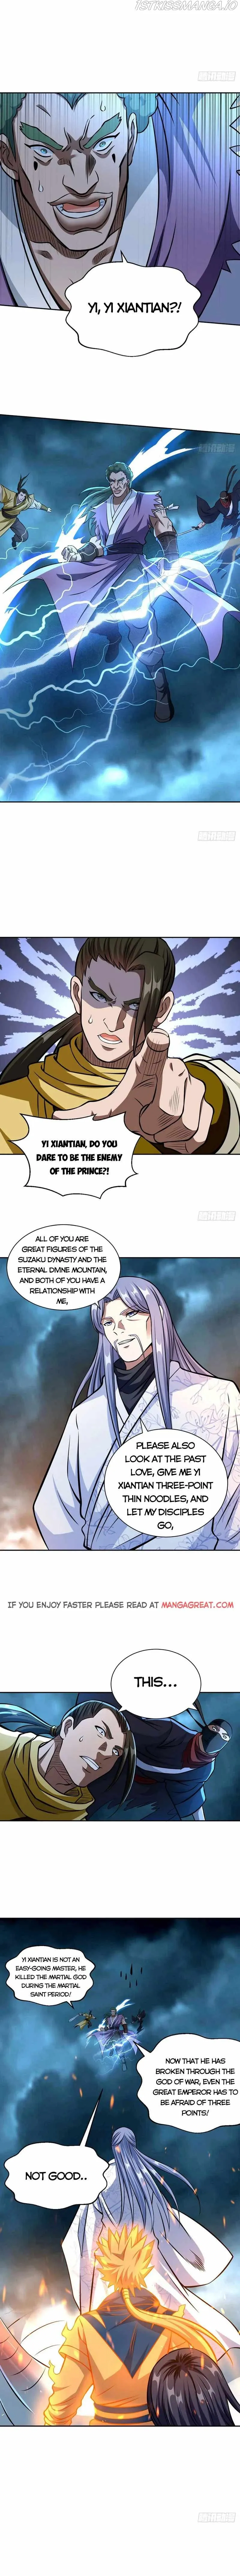 Martial Arts Reigns Chapter 494 page 7